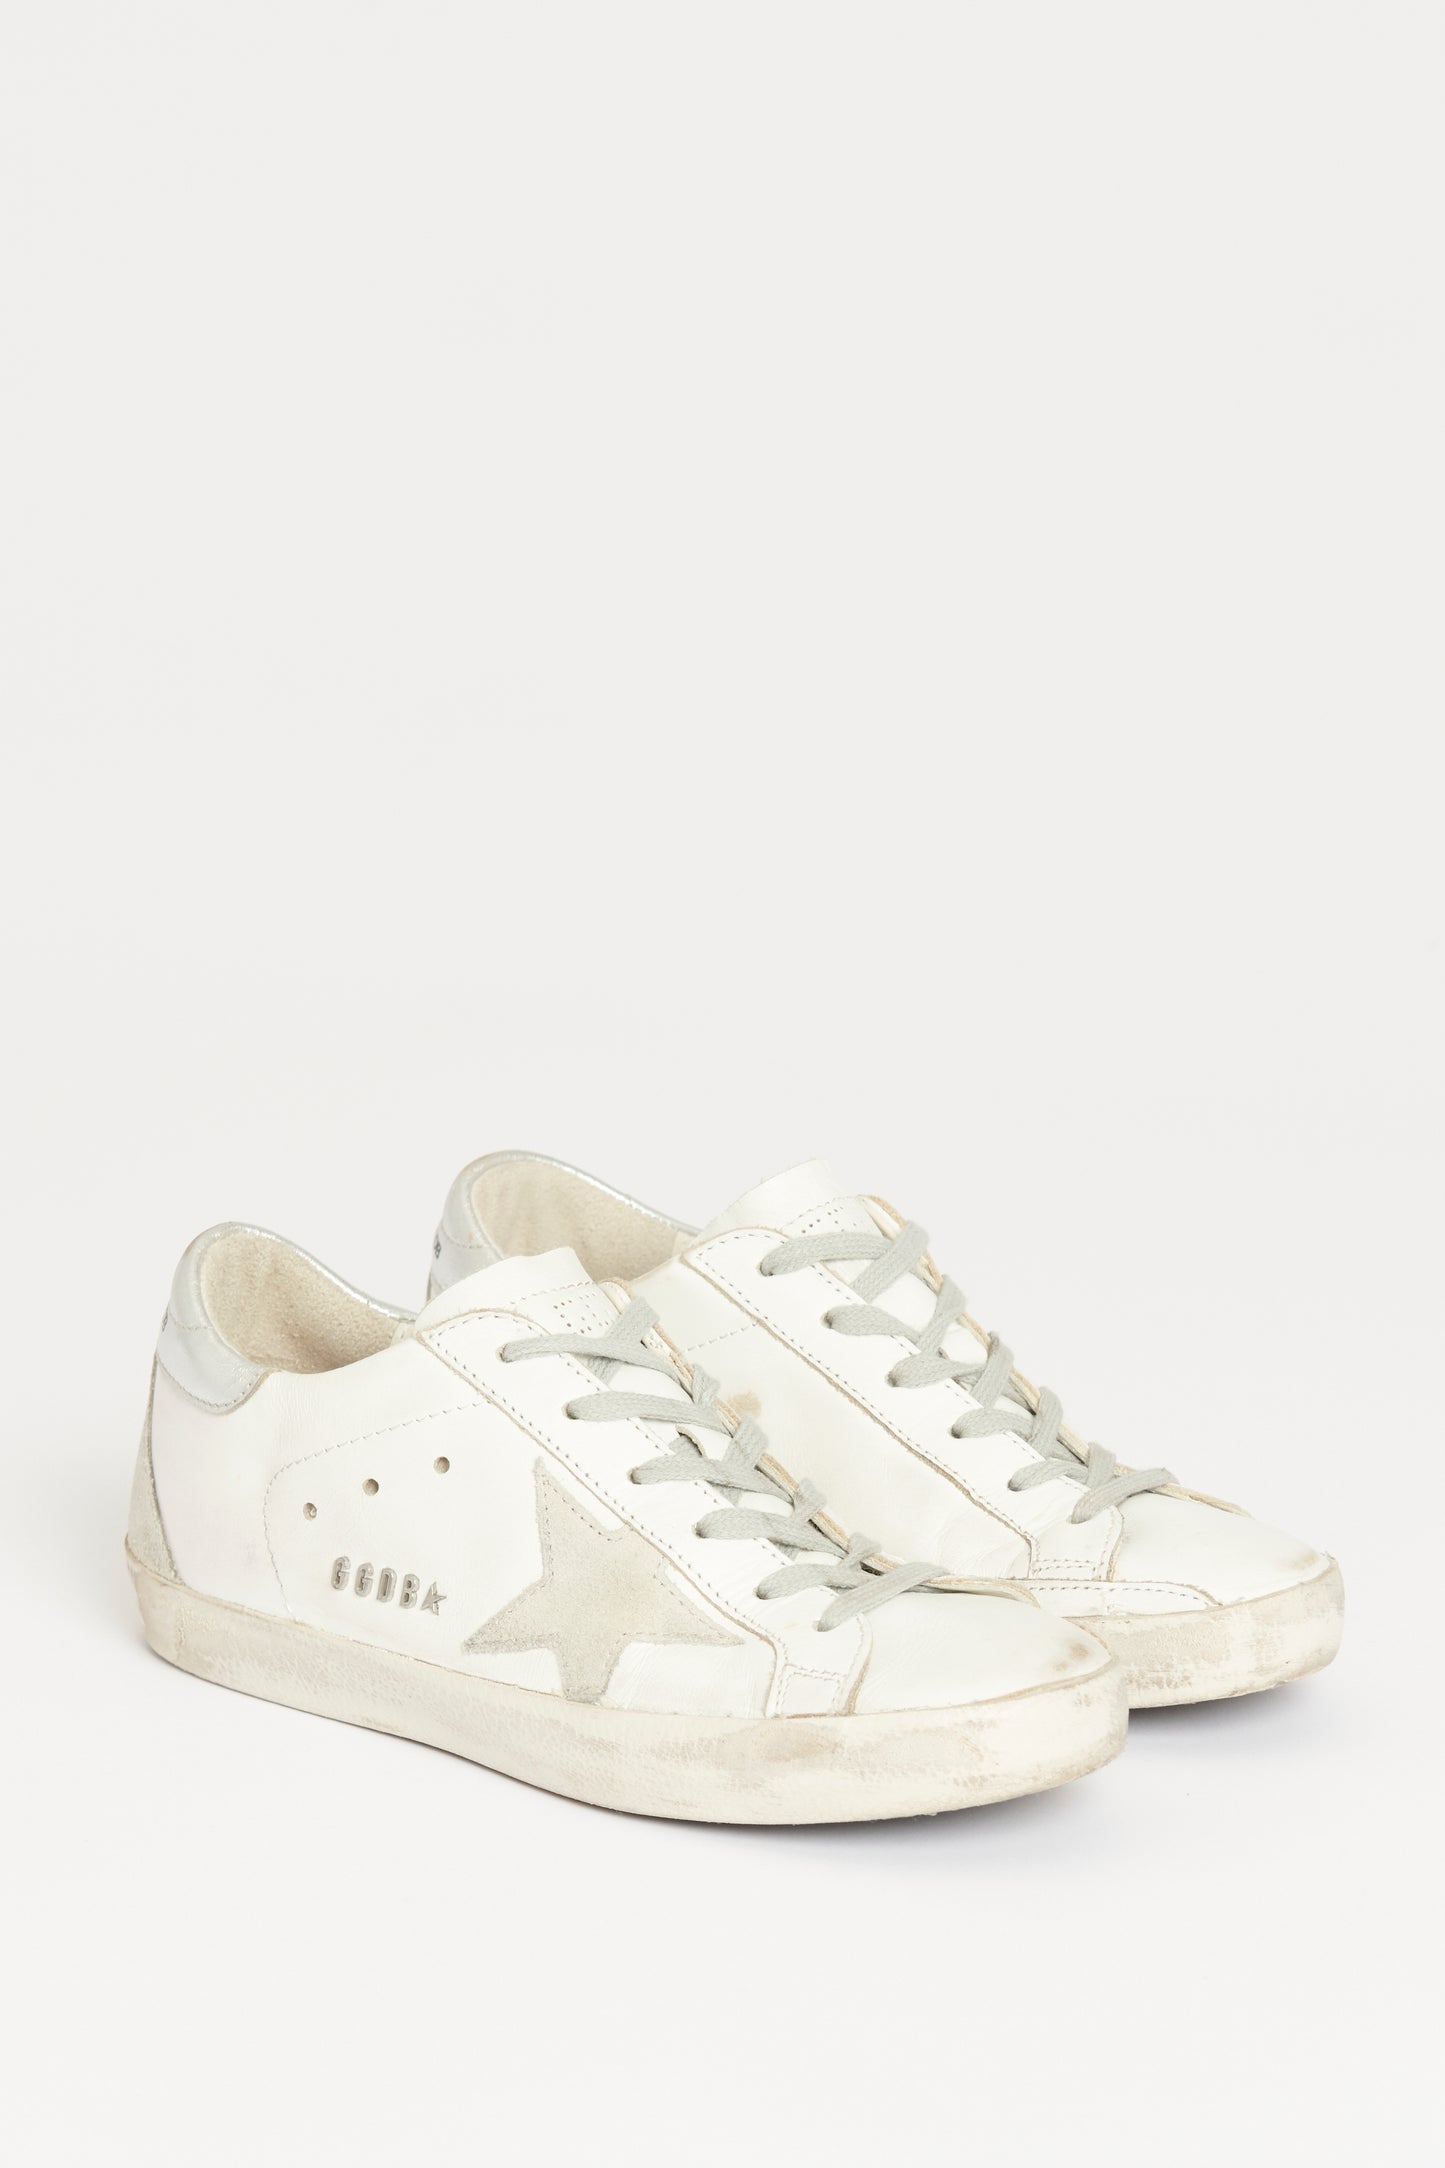 White Leather Superstar Preowned Sneaker